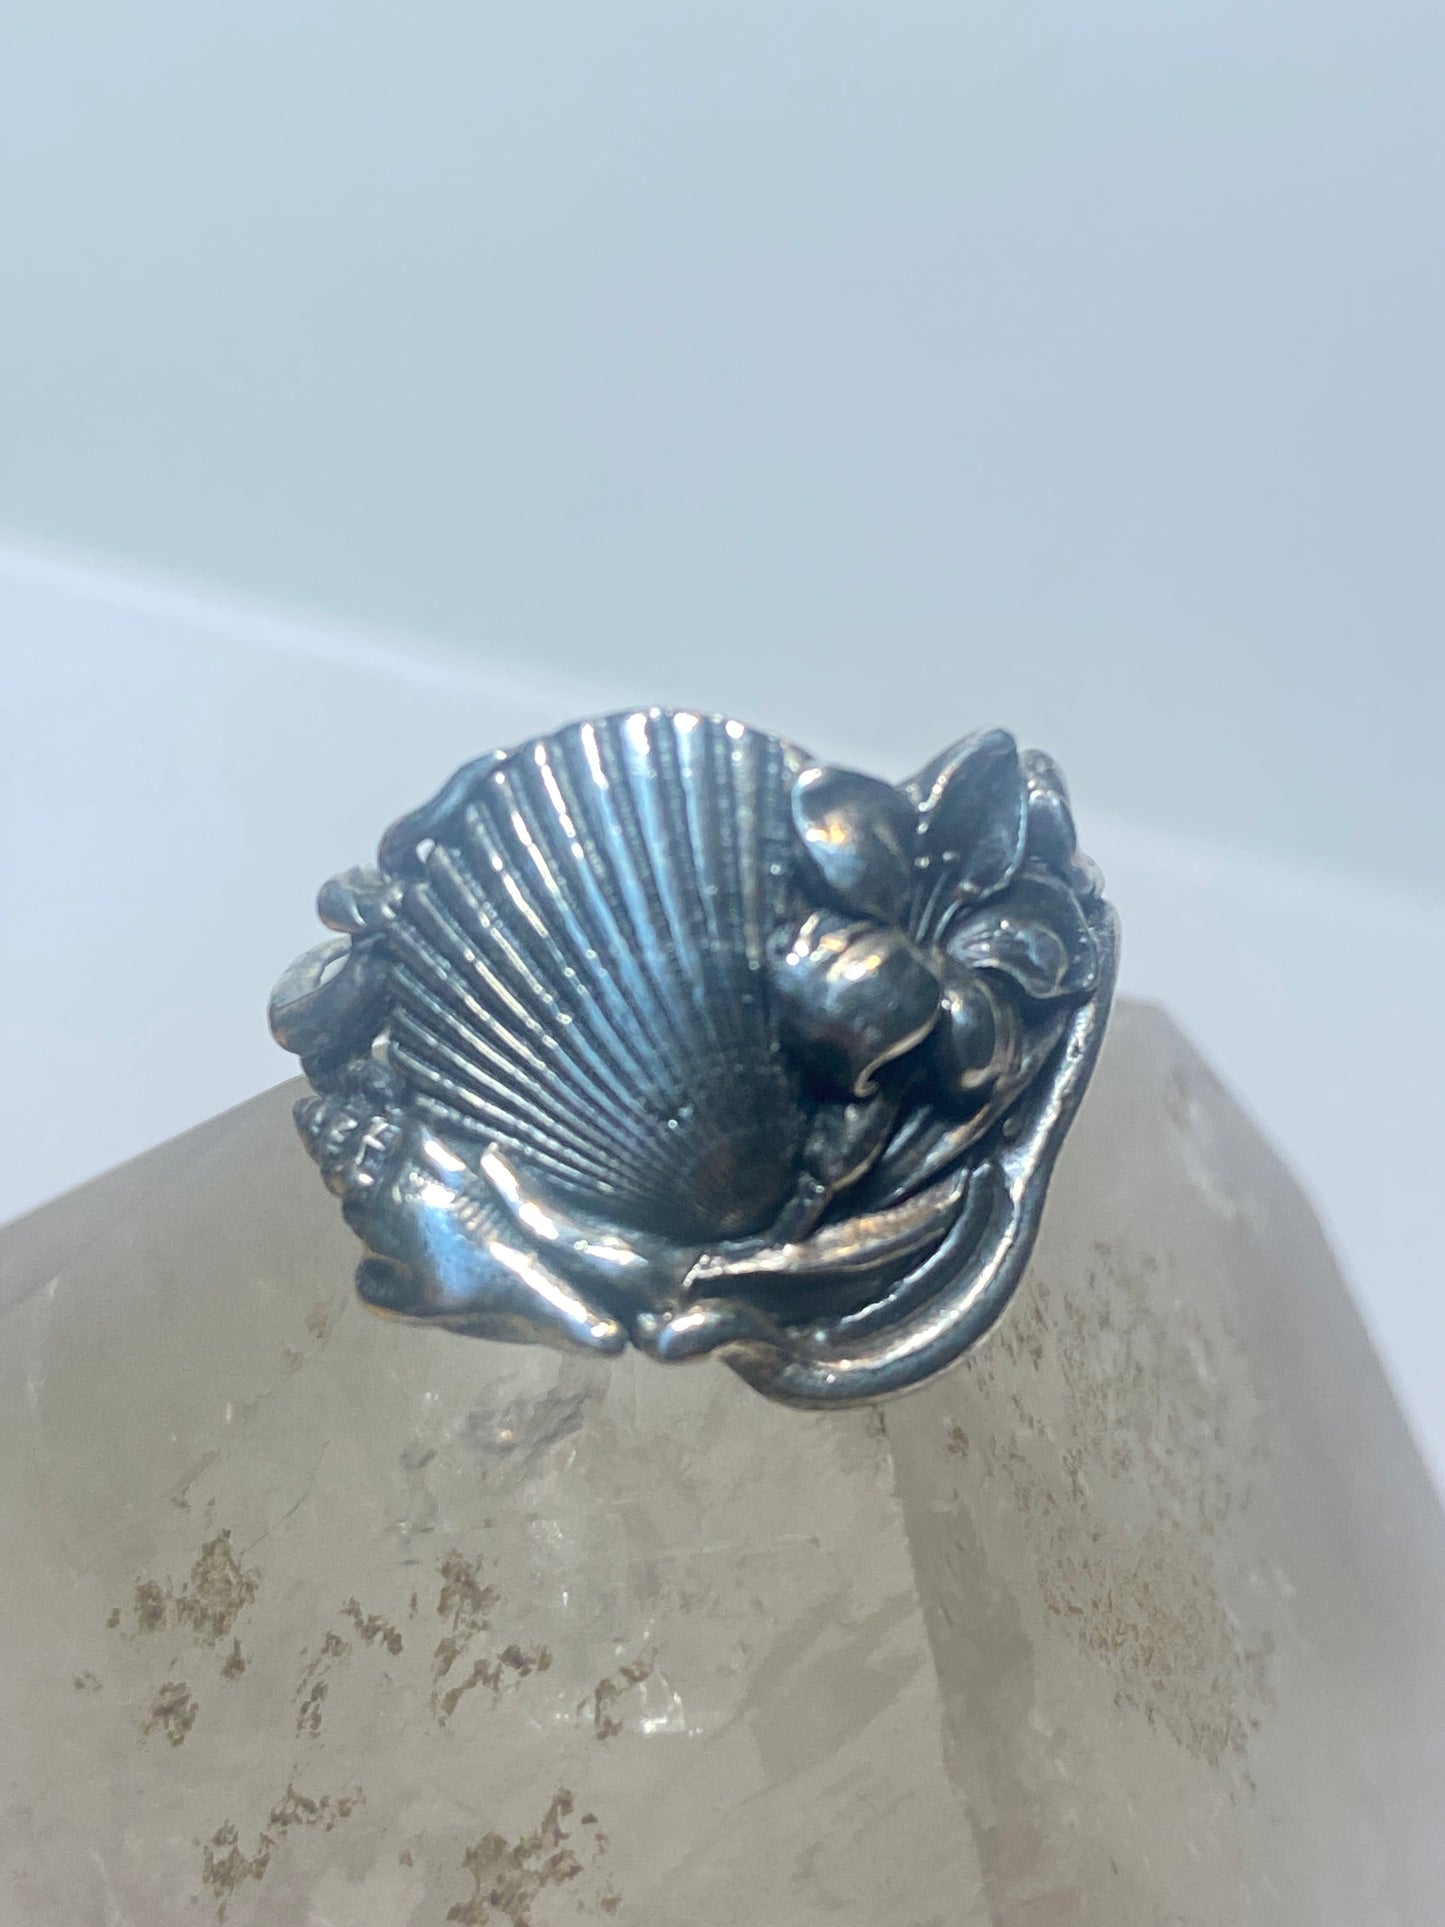 Shell ring floral beach scallop sea shells sterling silver women girls